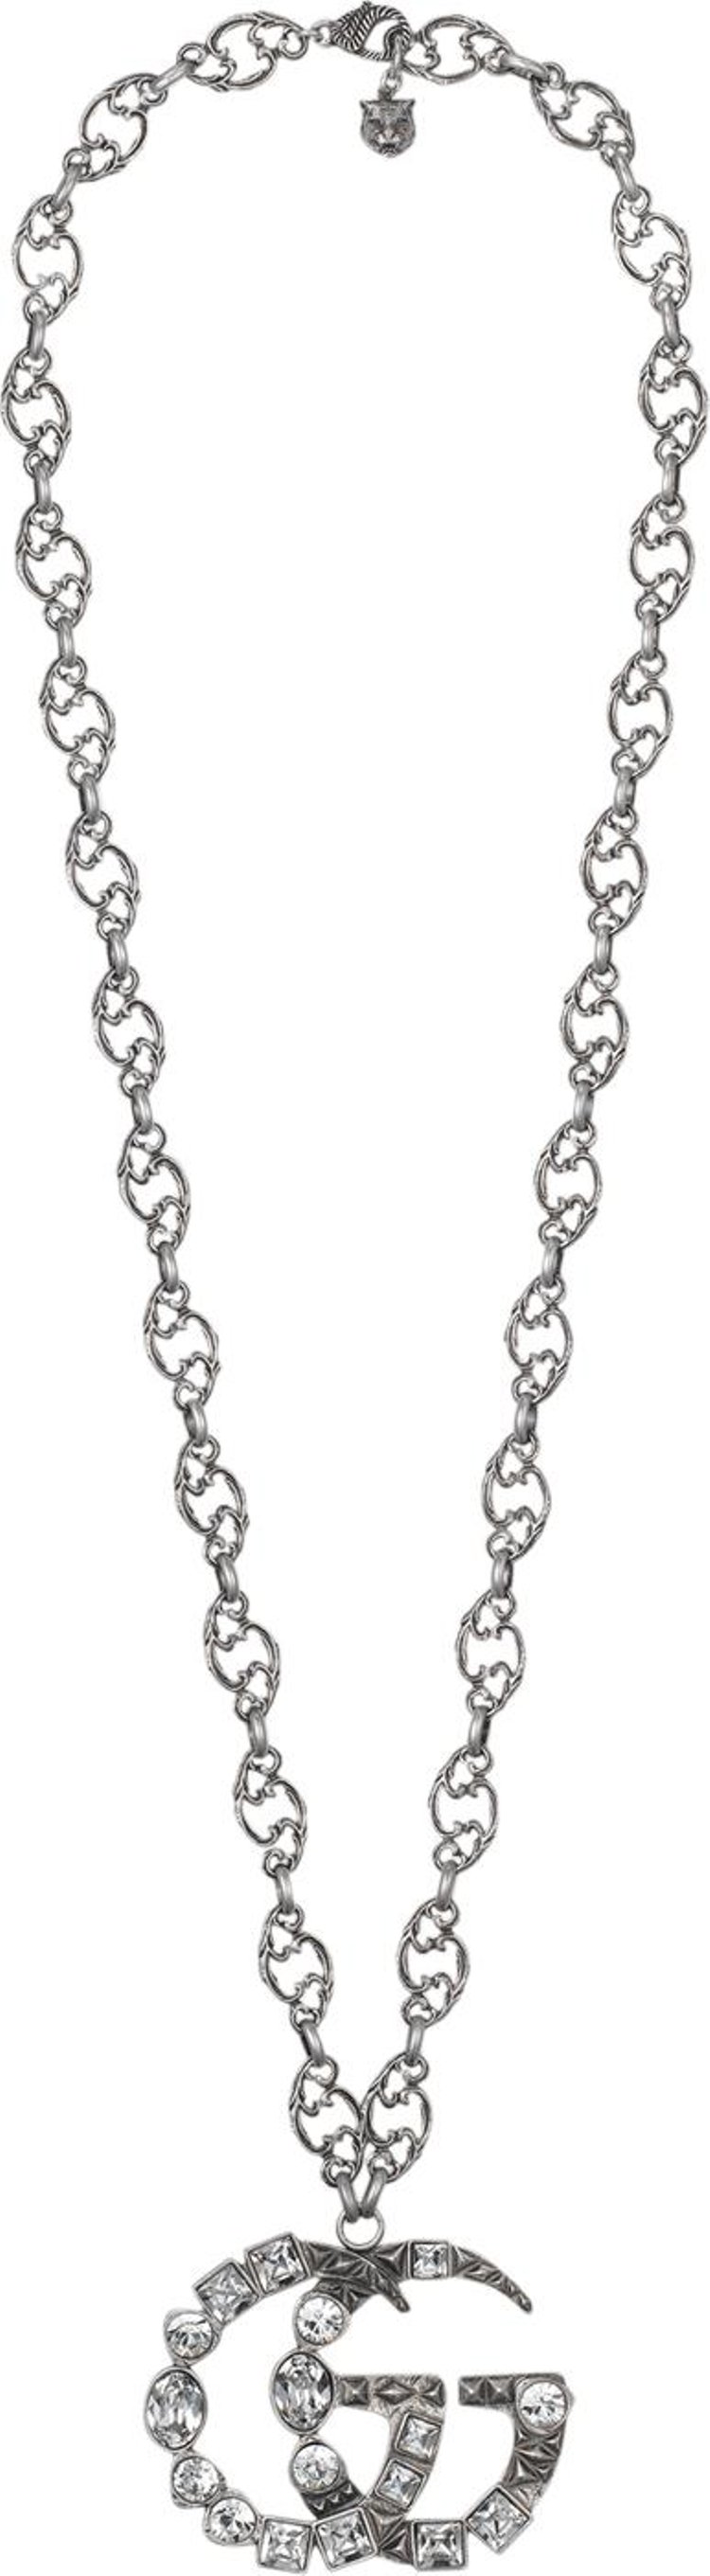 Gucci Crystal Double G necklace 'Aged Palladium' | GOAT